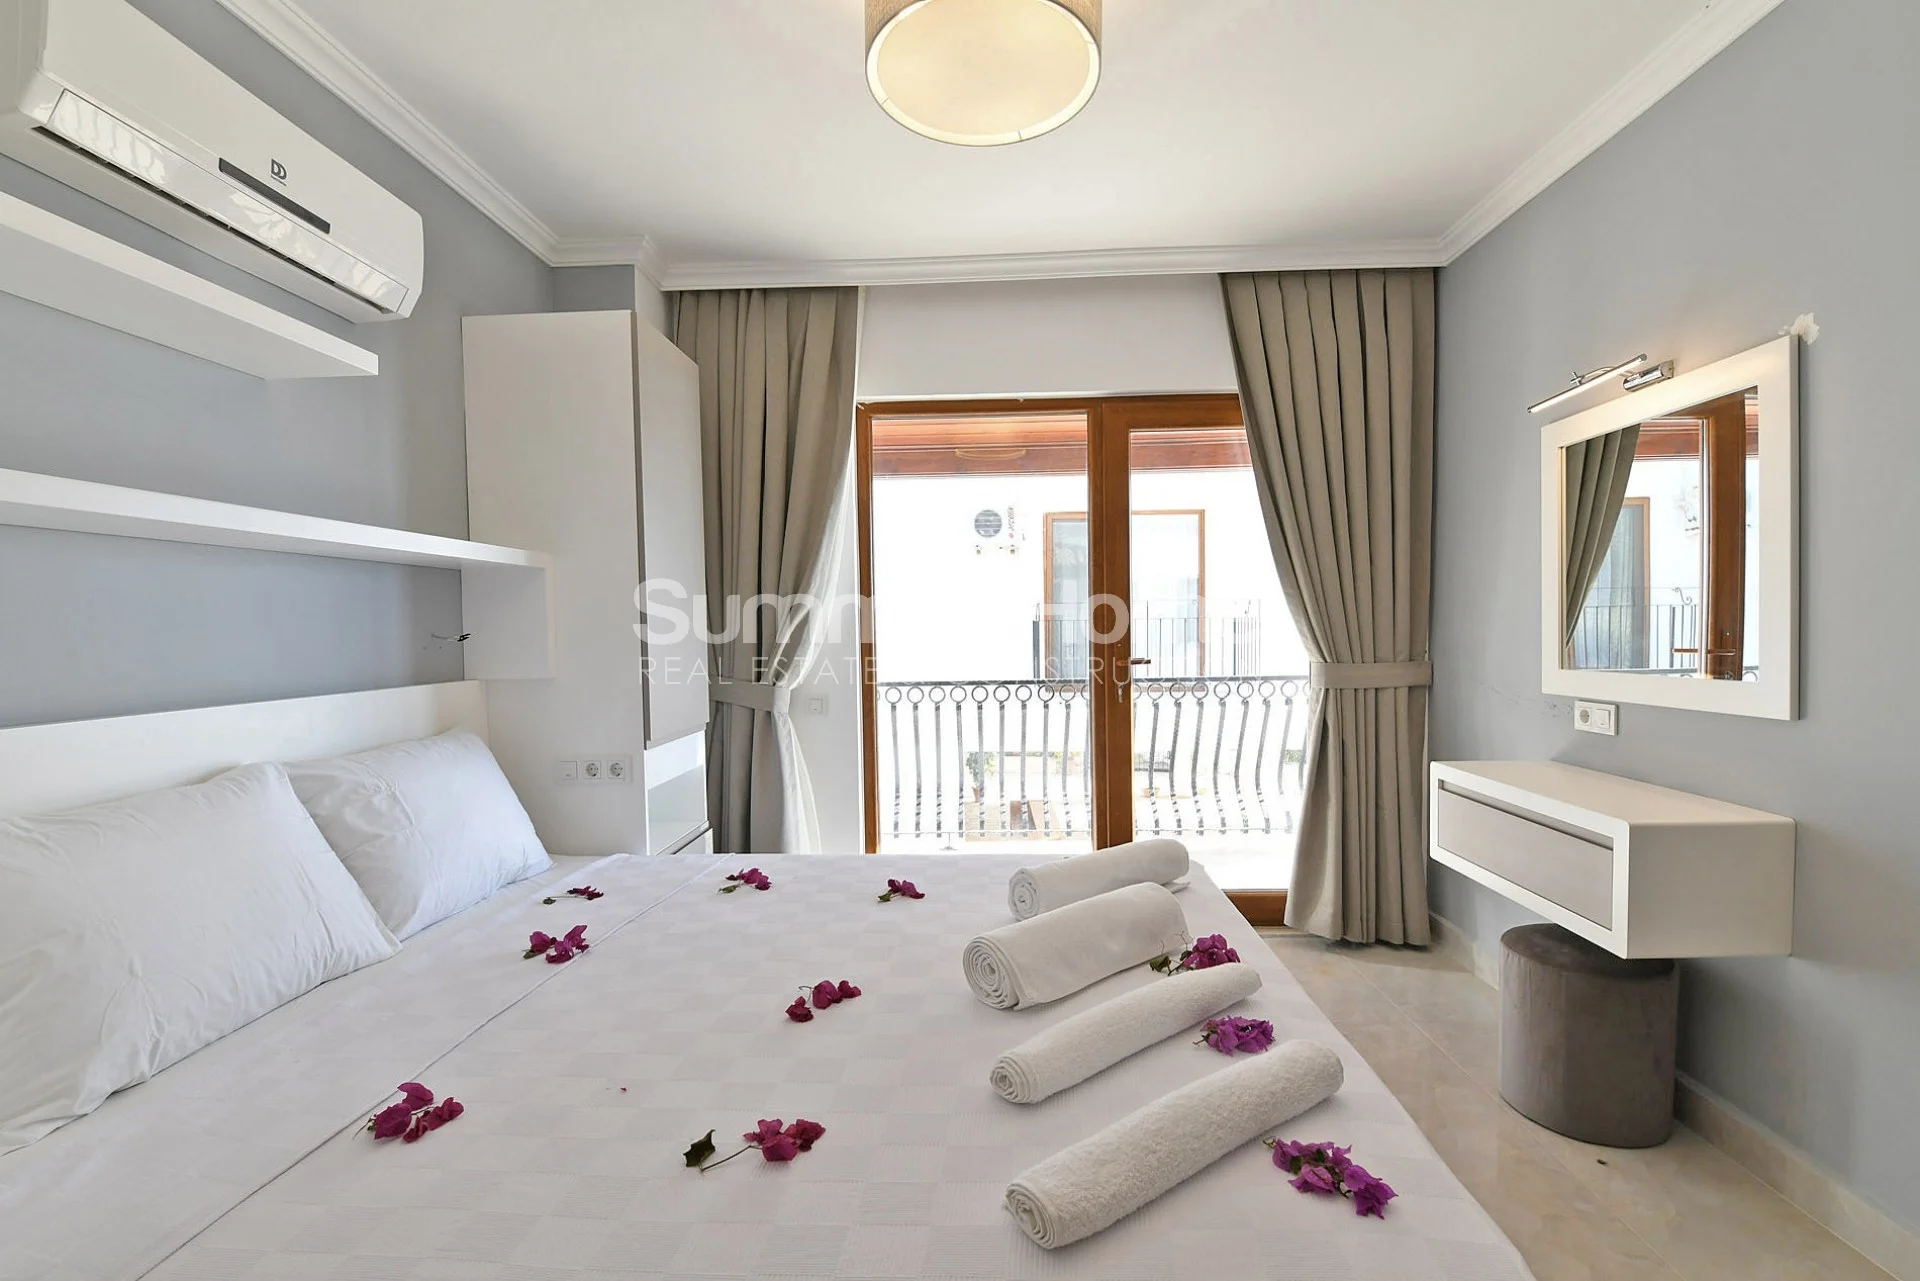 Five-bedroom tranquil villa with private pool in Kalkan Interior - 4